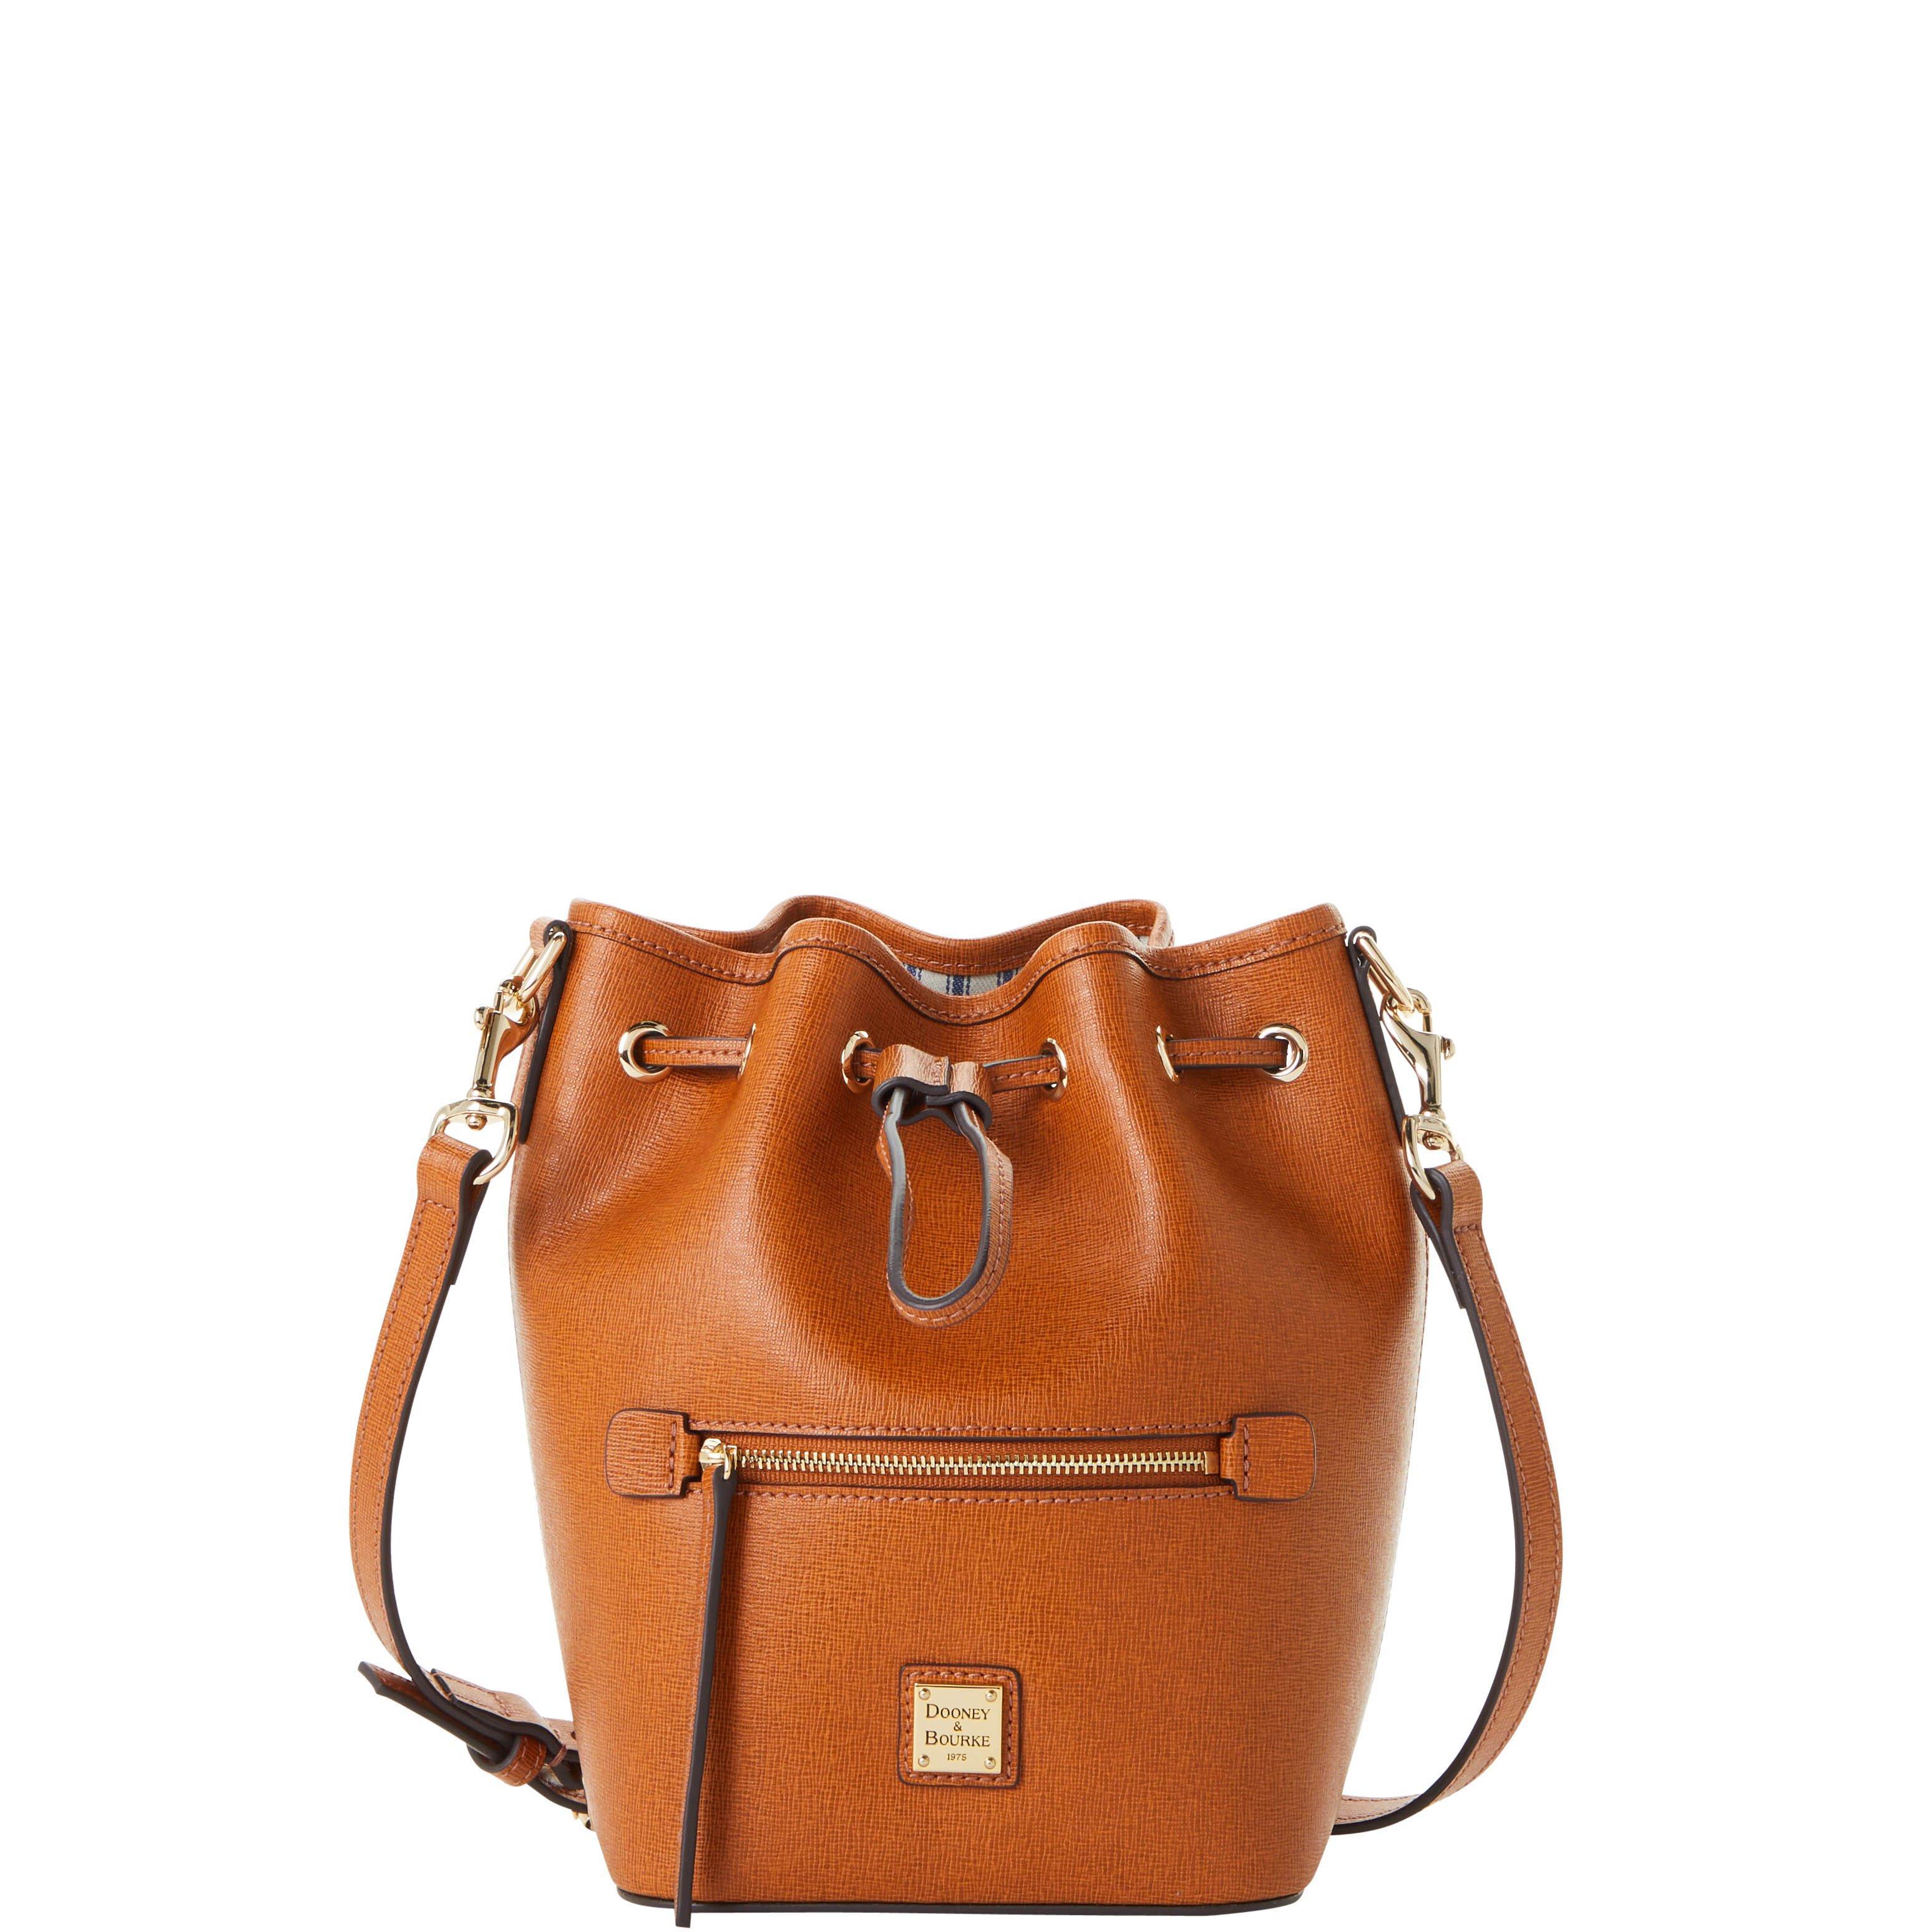 Dooney & Bourke Leather Saffiano Small Drawstring Crossbody in Natural ...